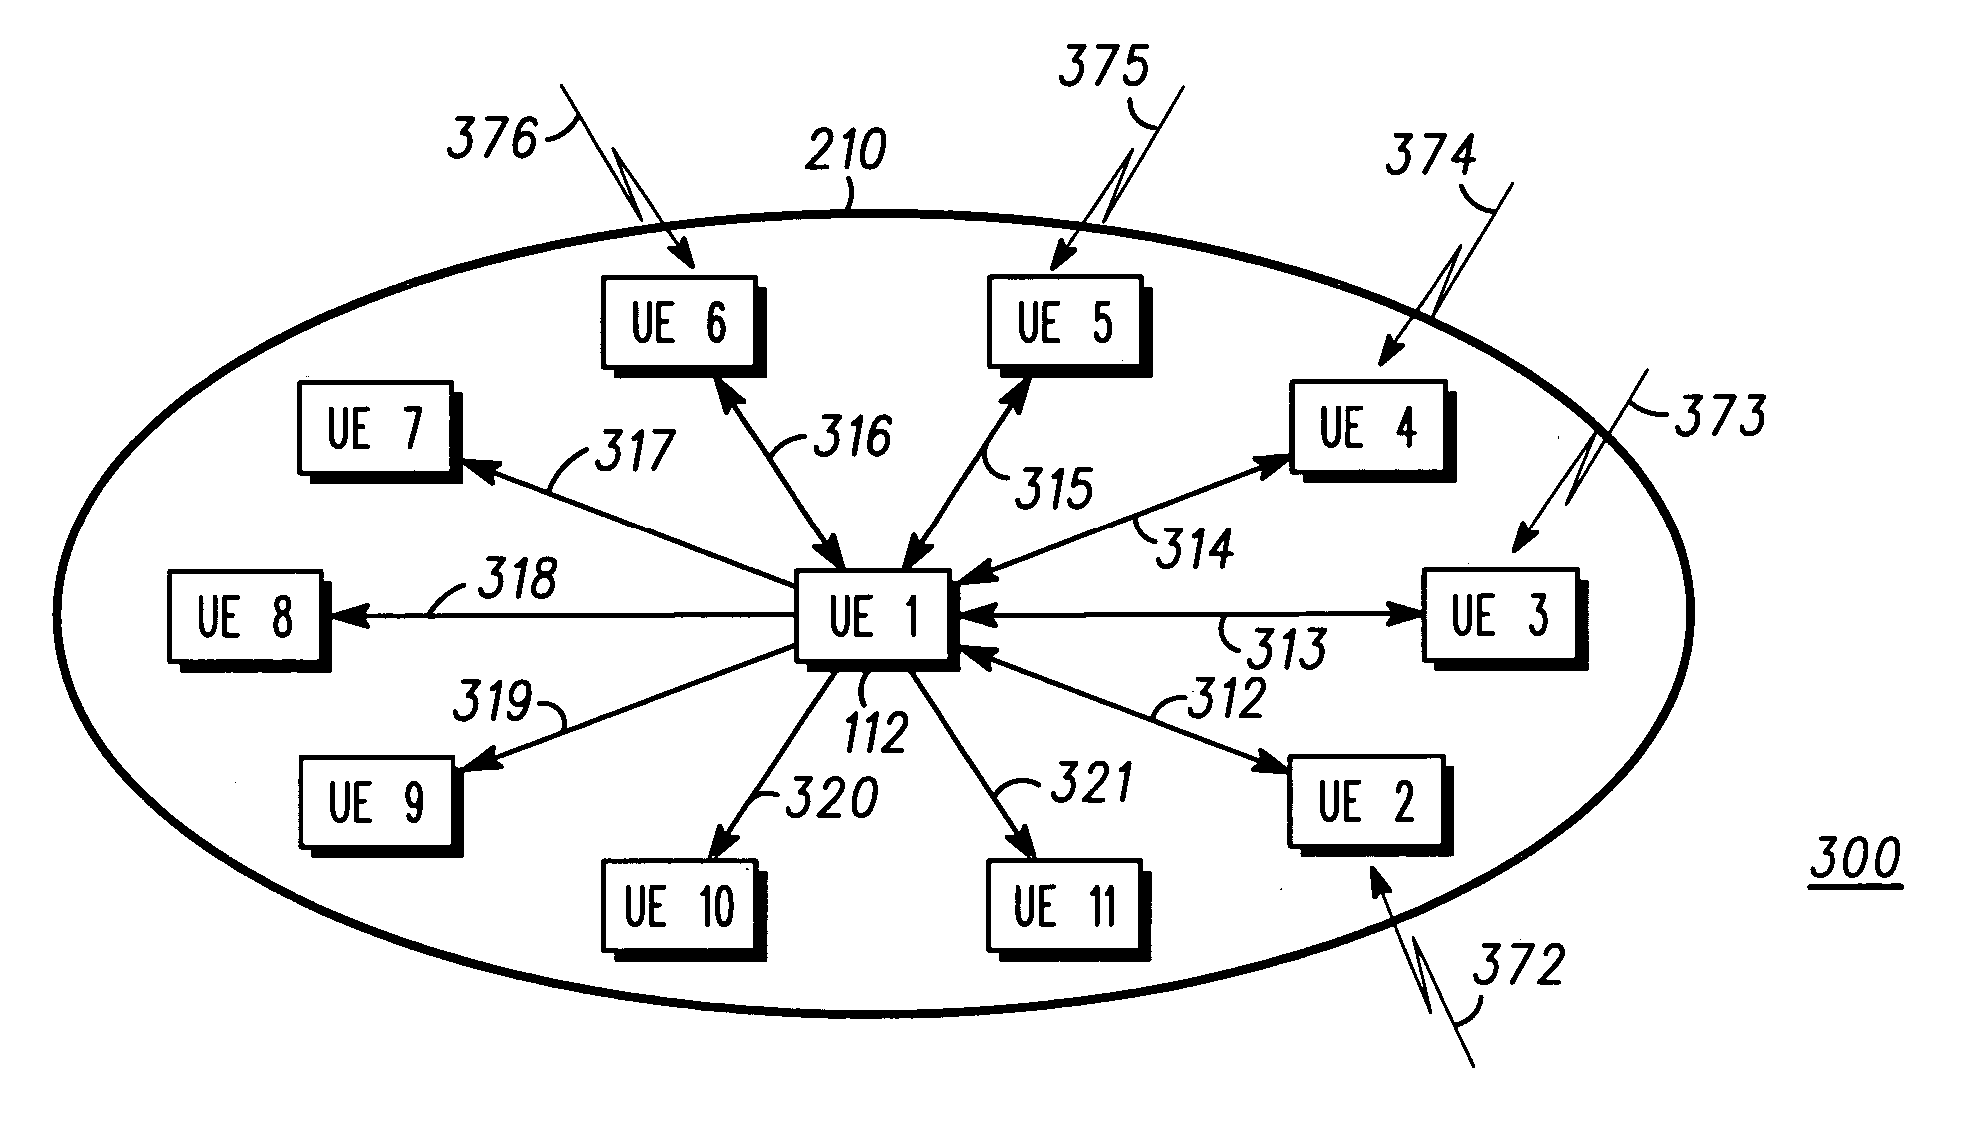 Method for enhancing the communication capability in a wireless telecommunication system